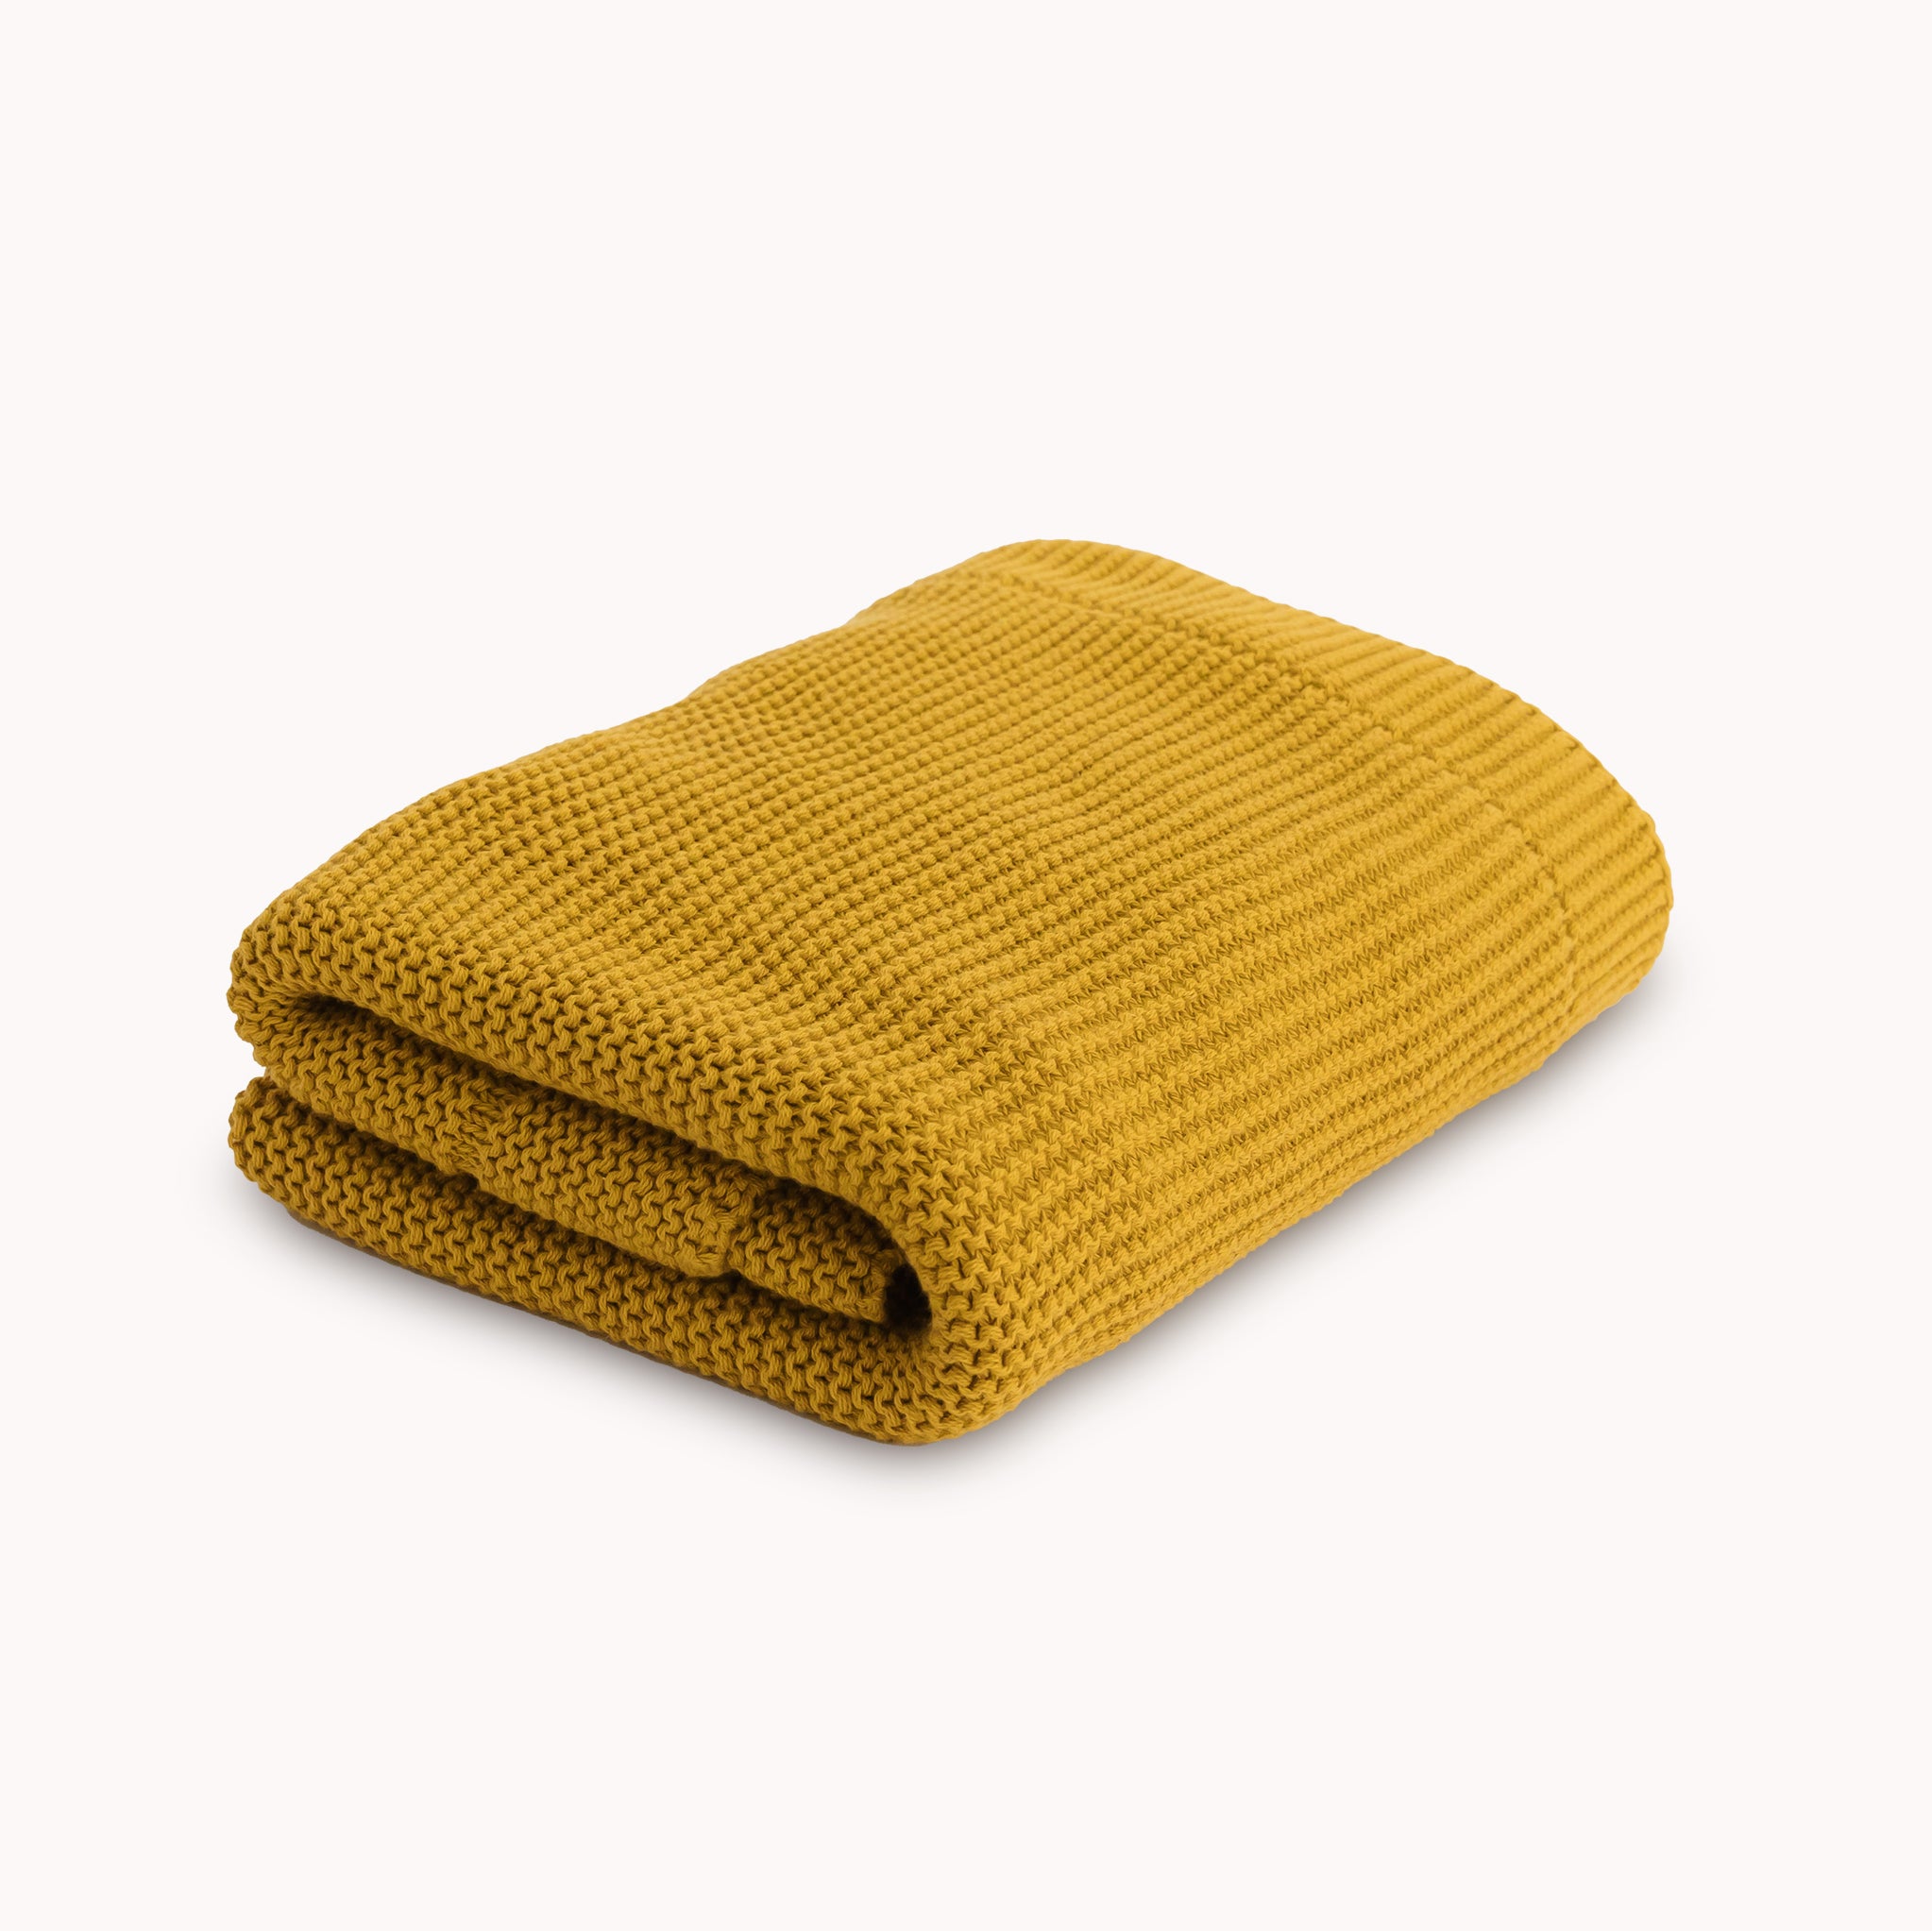 Knitted Baby Blanket in Harvest Gold - Natemia